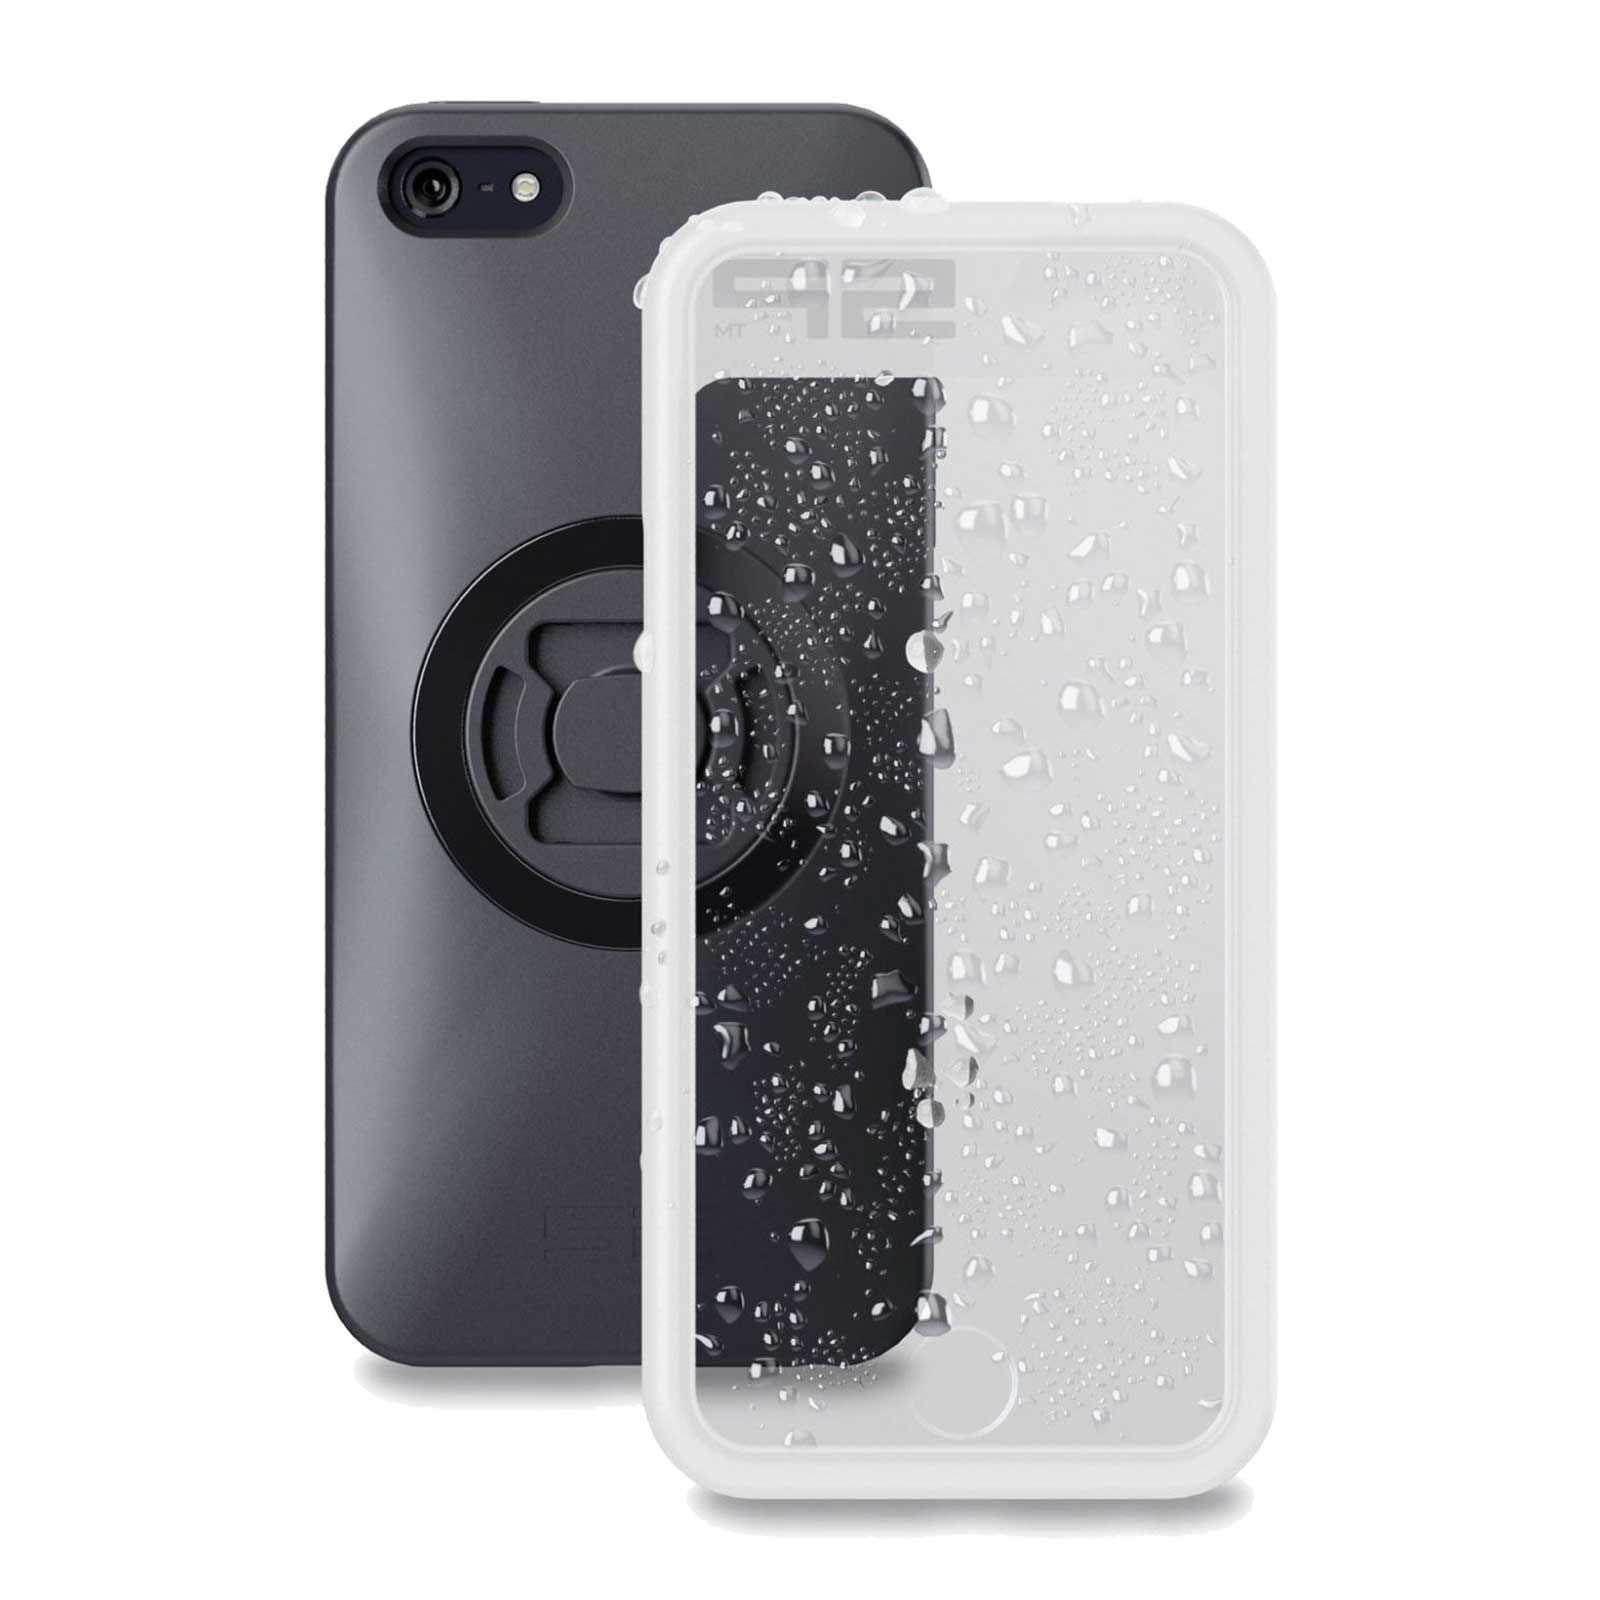 New SP CONNECT WEATHER COVER APPLE IPHONE 5//SE SPC53180